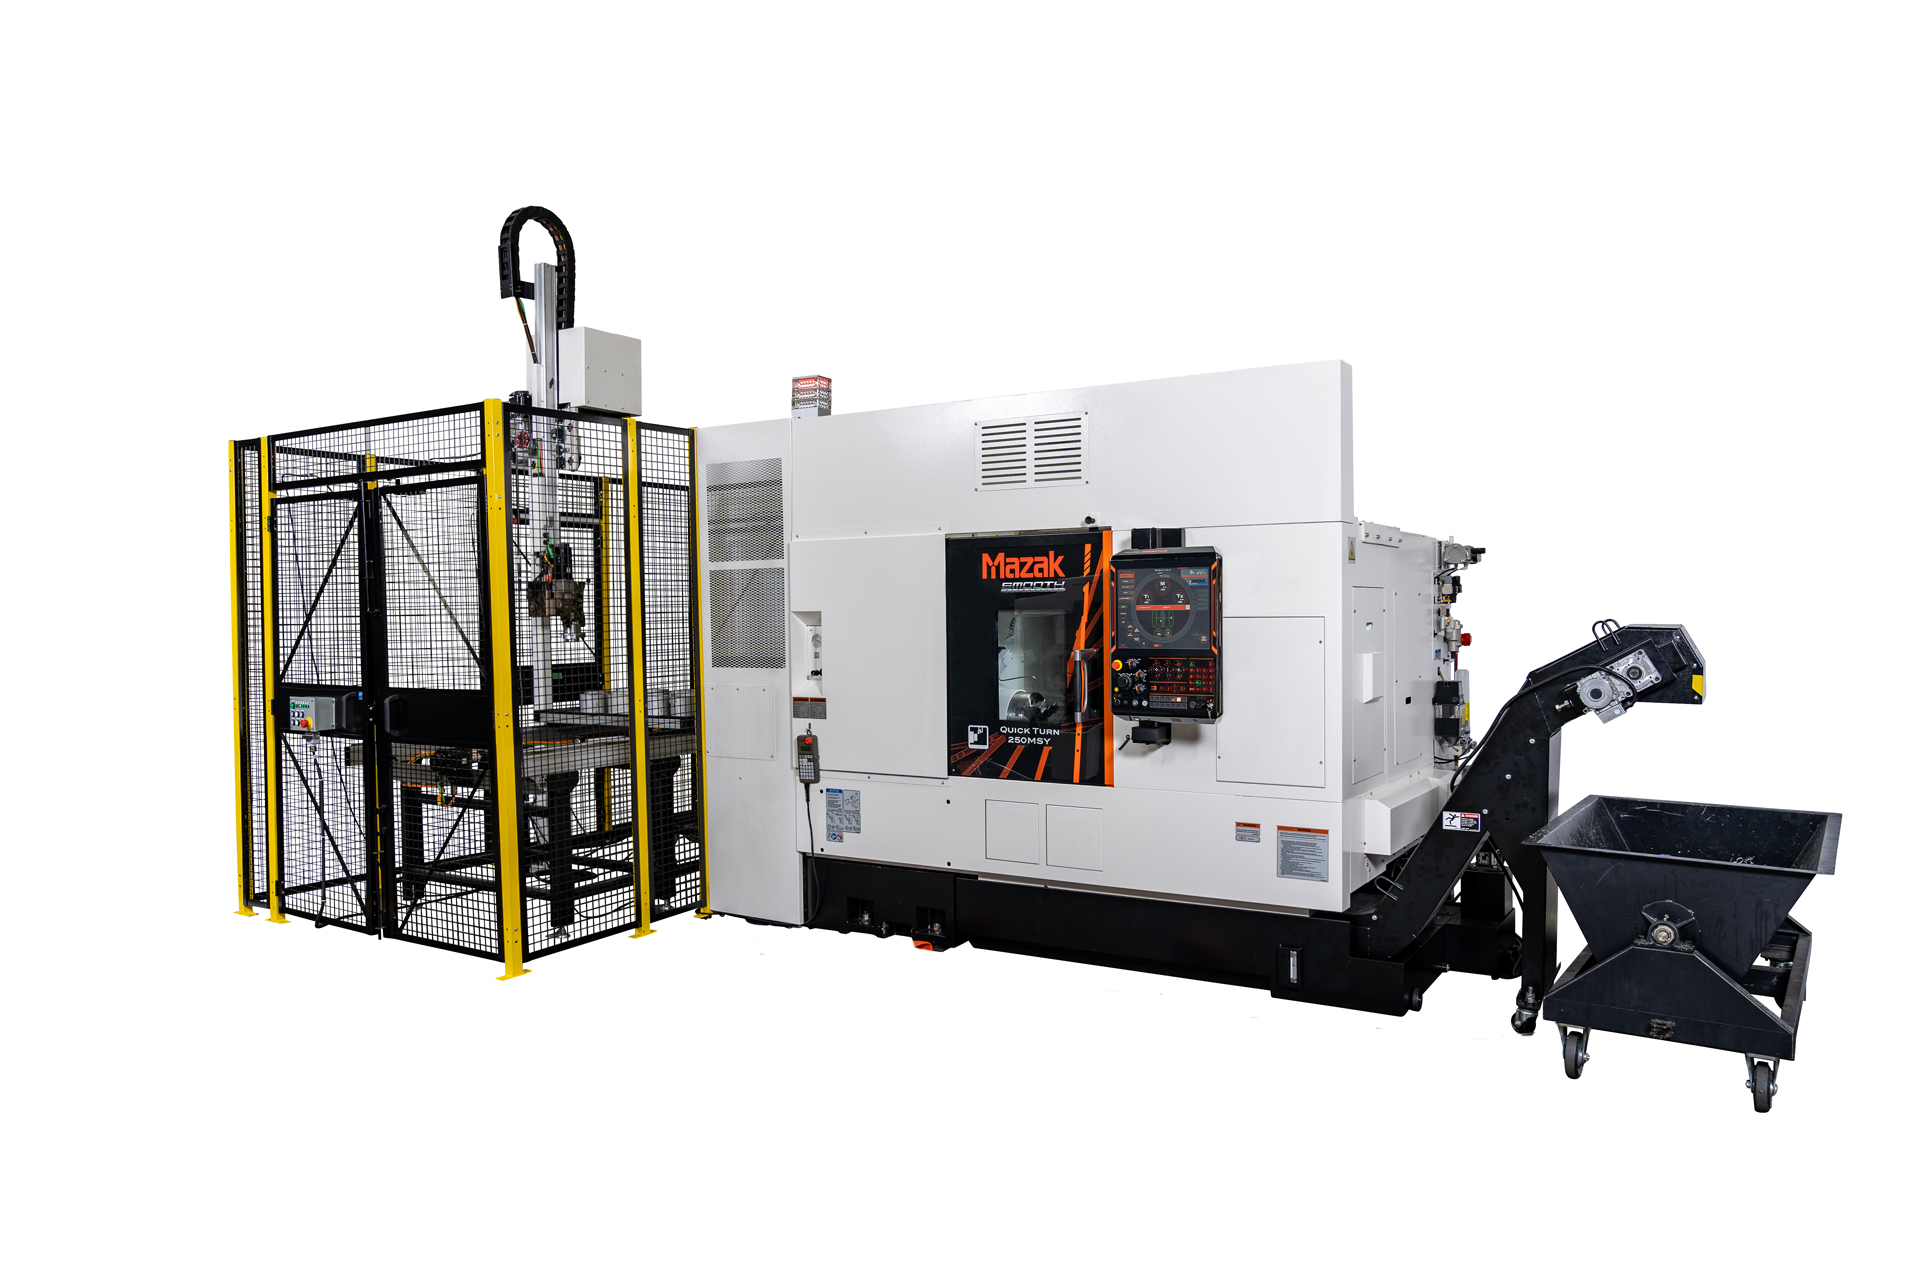 Mazak Adds Automation to Multi-Tasking with the QUICK TURN 250MSY + GR100